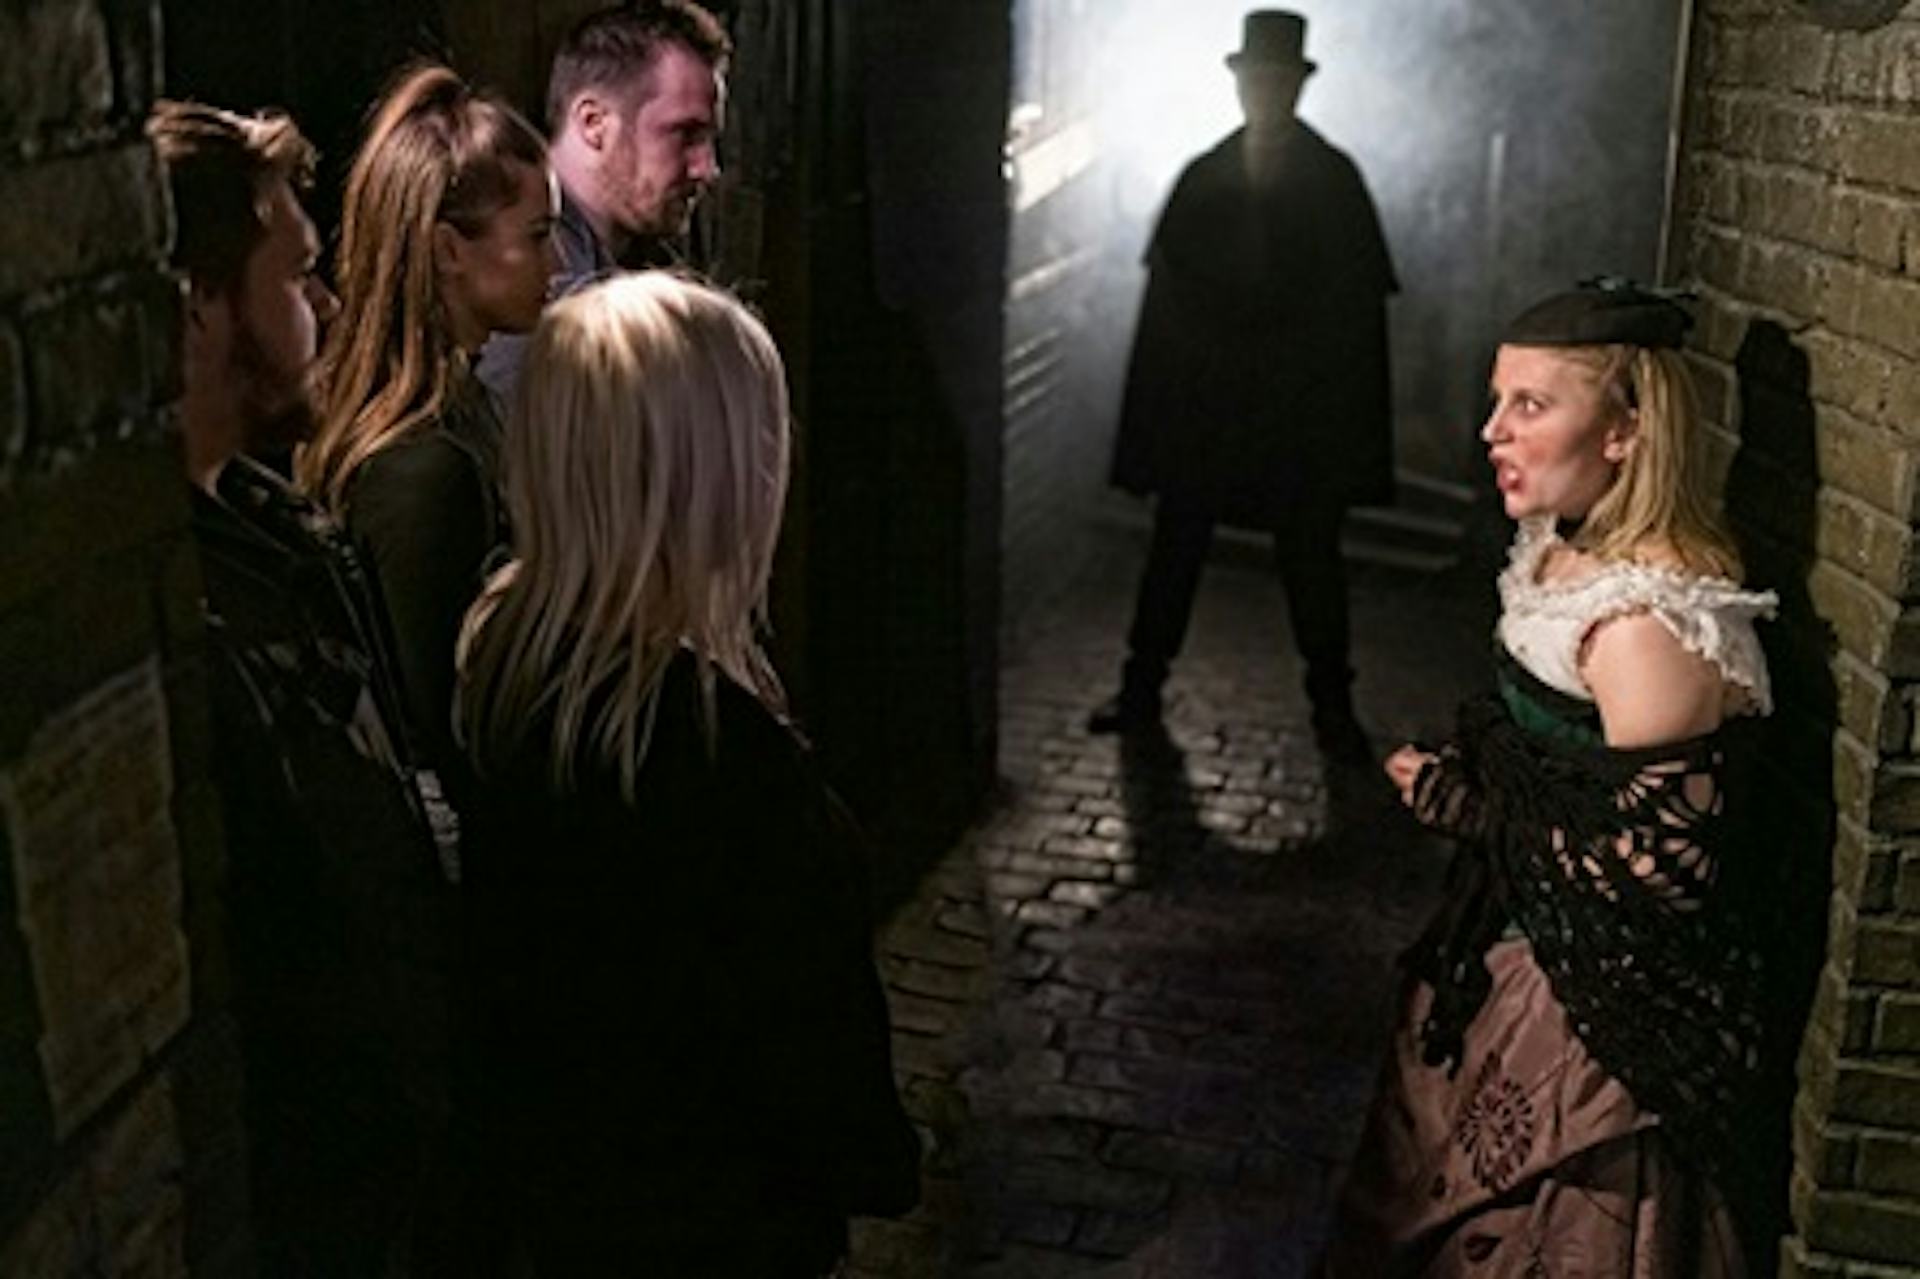 Visit to London Dungeons for Two Adults